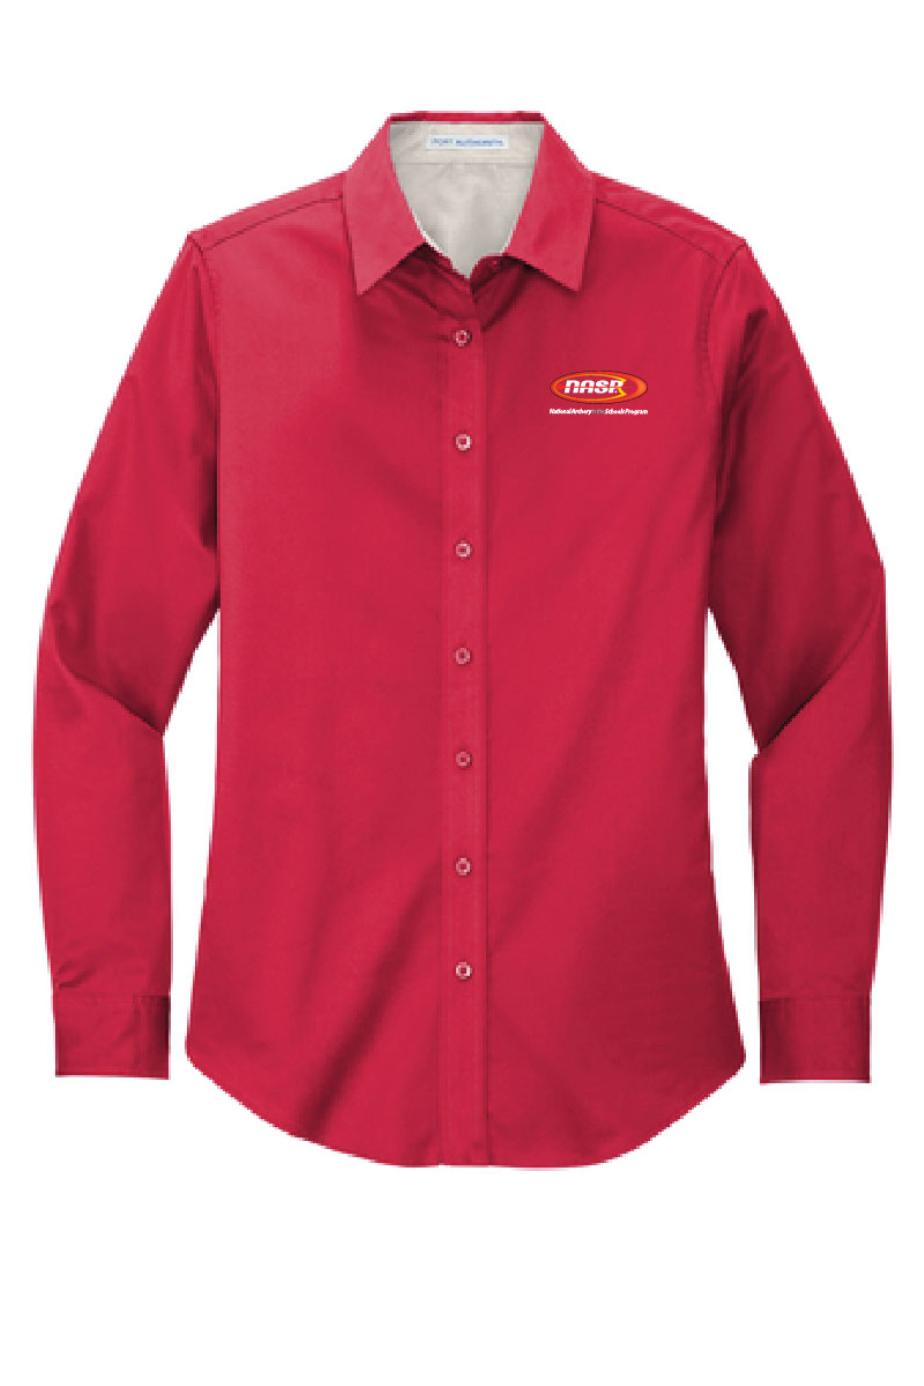 NASP® - Port Authority® Ladies Long Sleeve Easy Care Shirt - L608